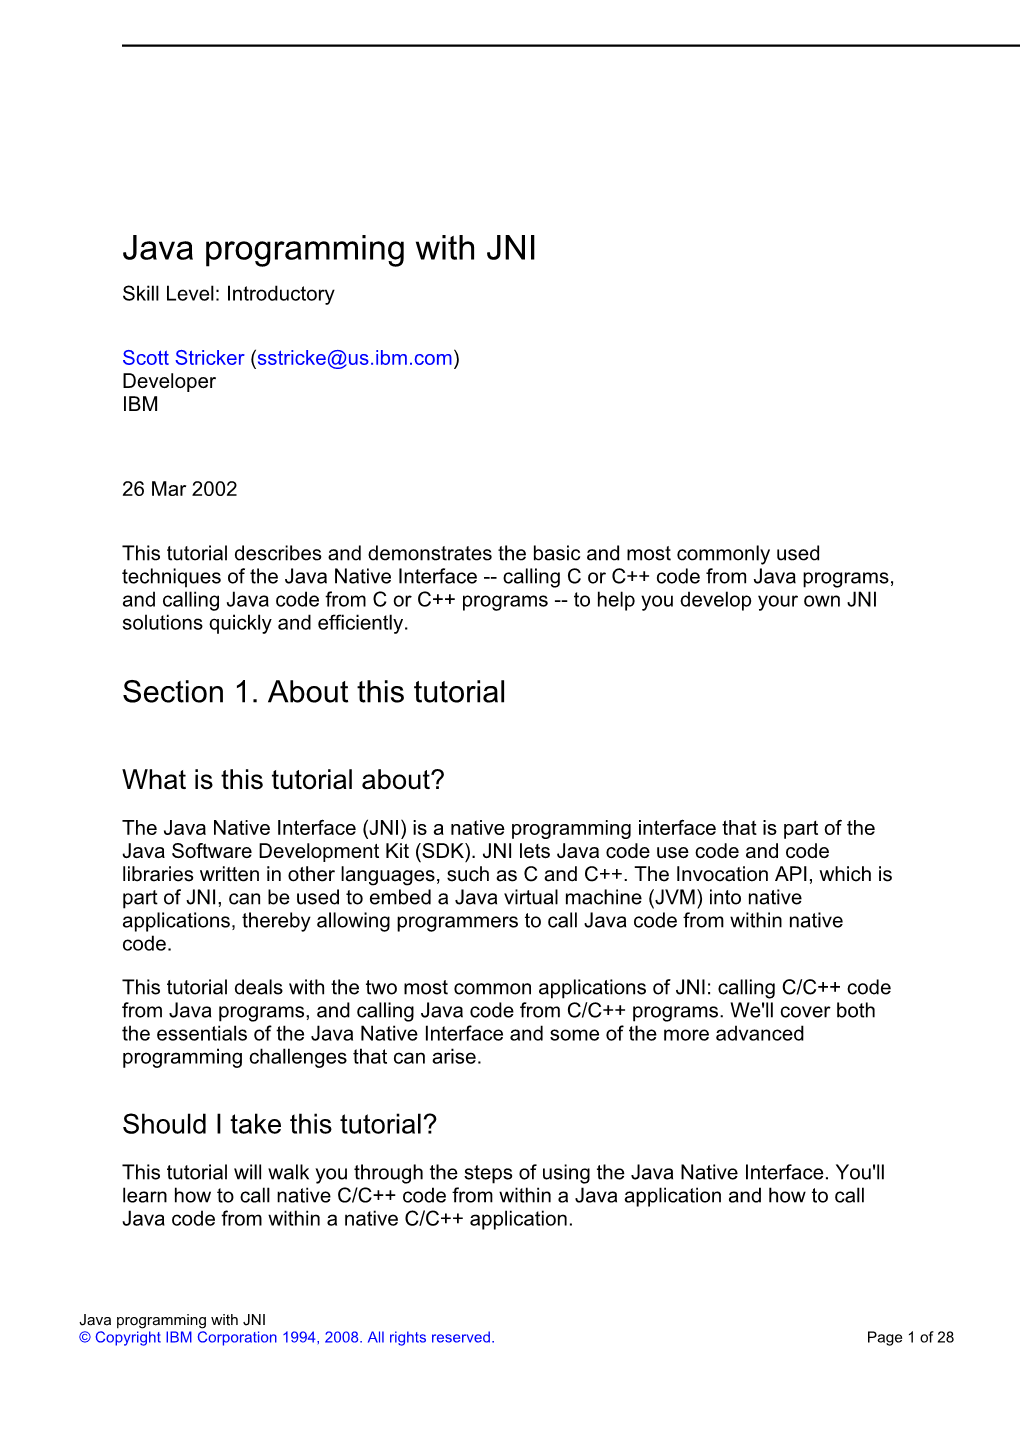 Java Programming with JNI Skill Level: Introductory